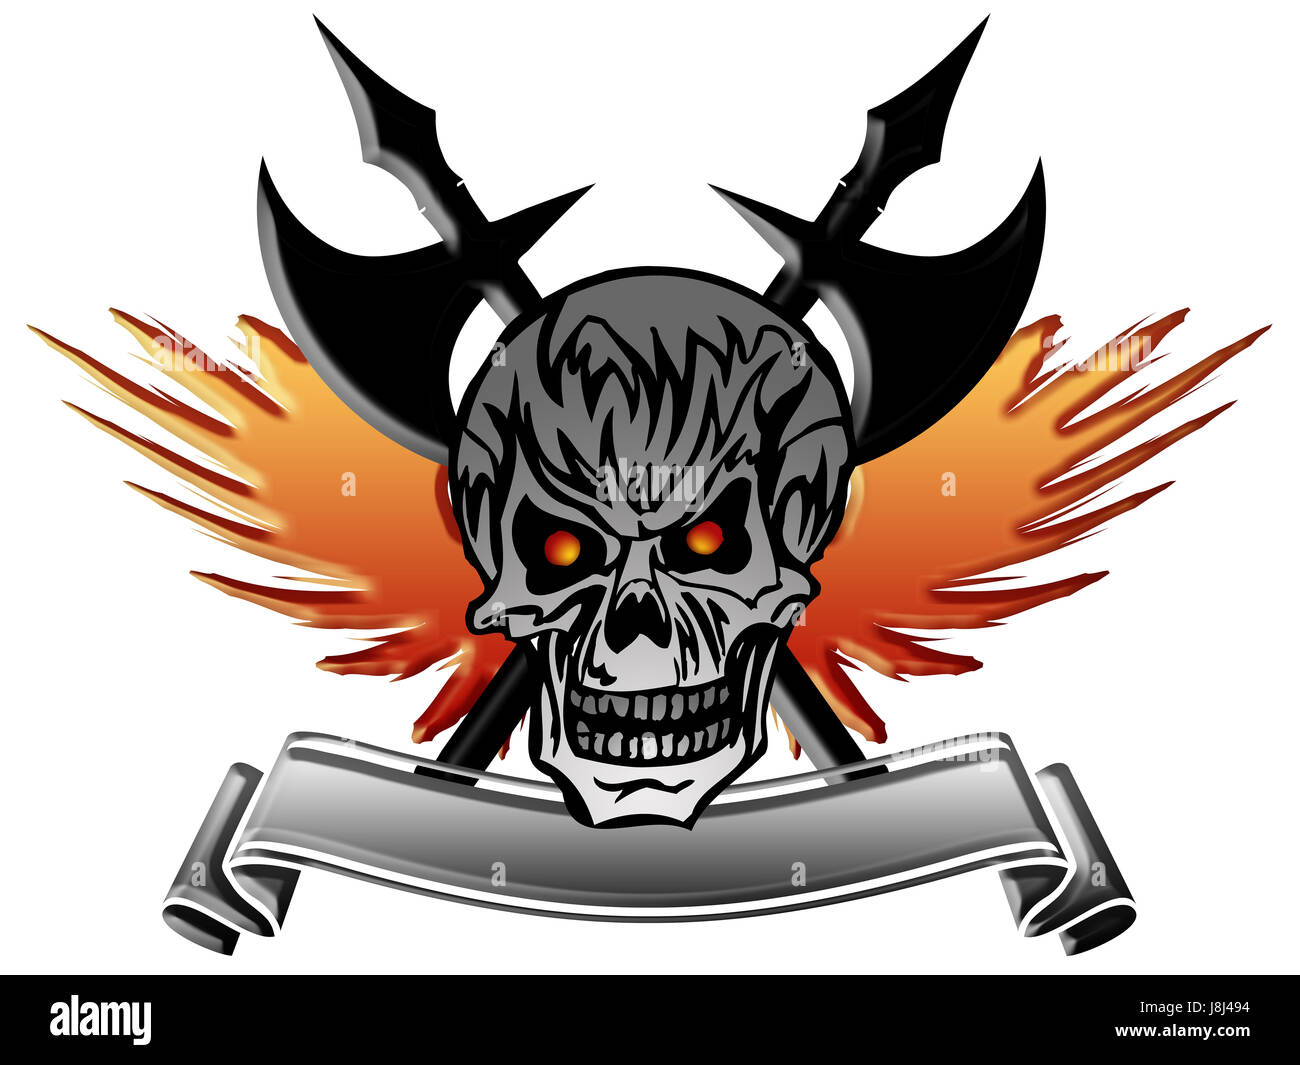 skull, scary, spooky, skeleton, banner, axe, wings, head, isolated, death, Stock Photo